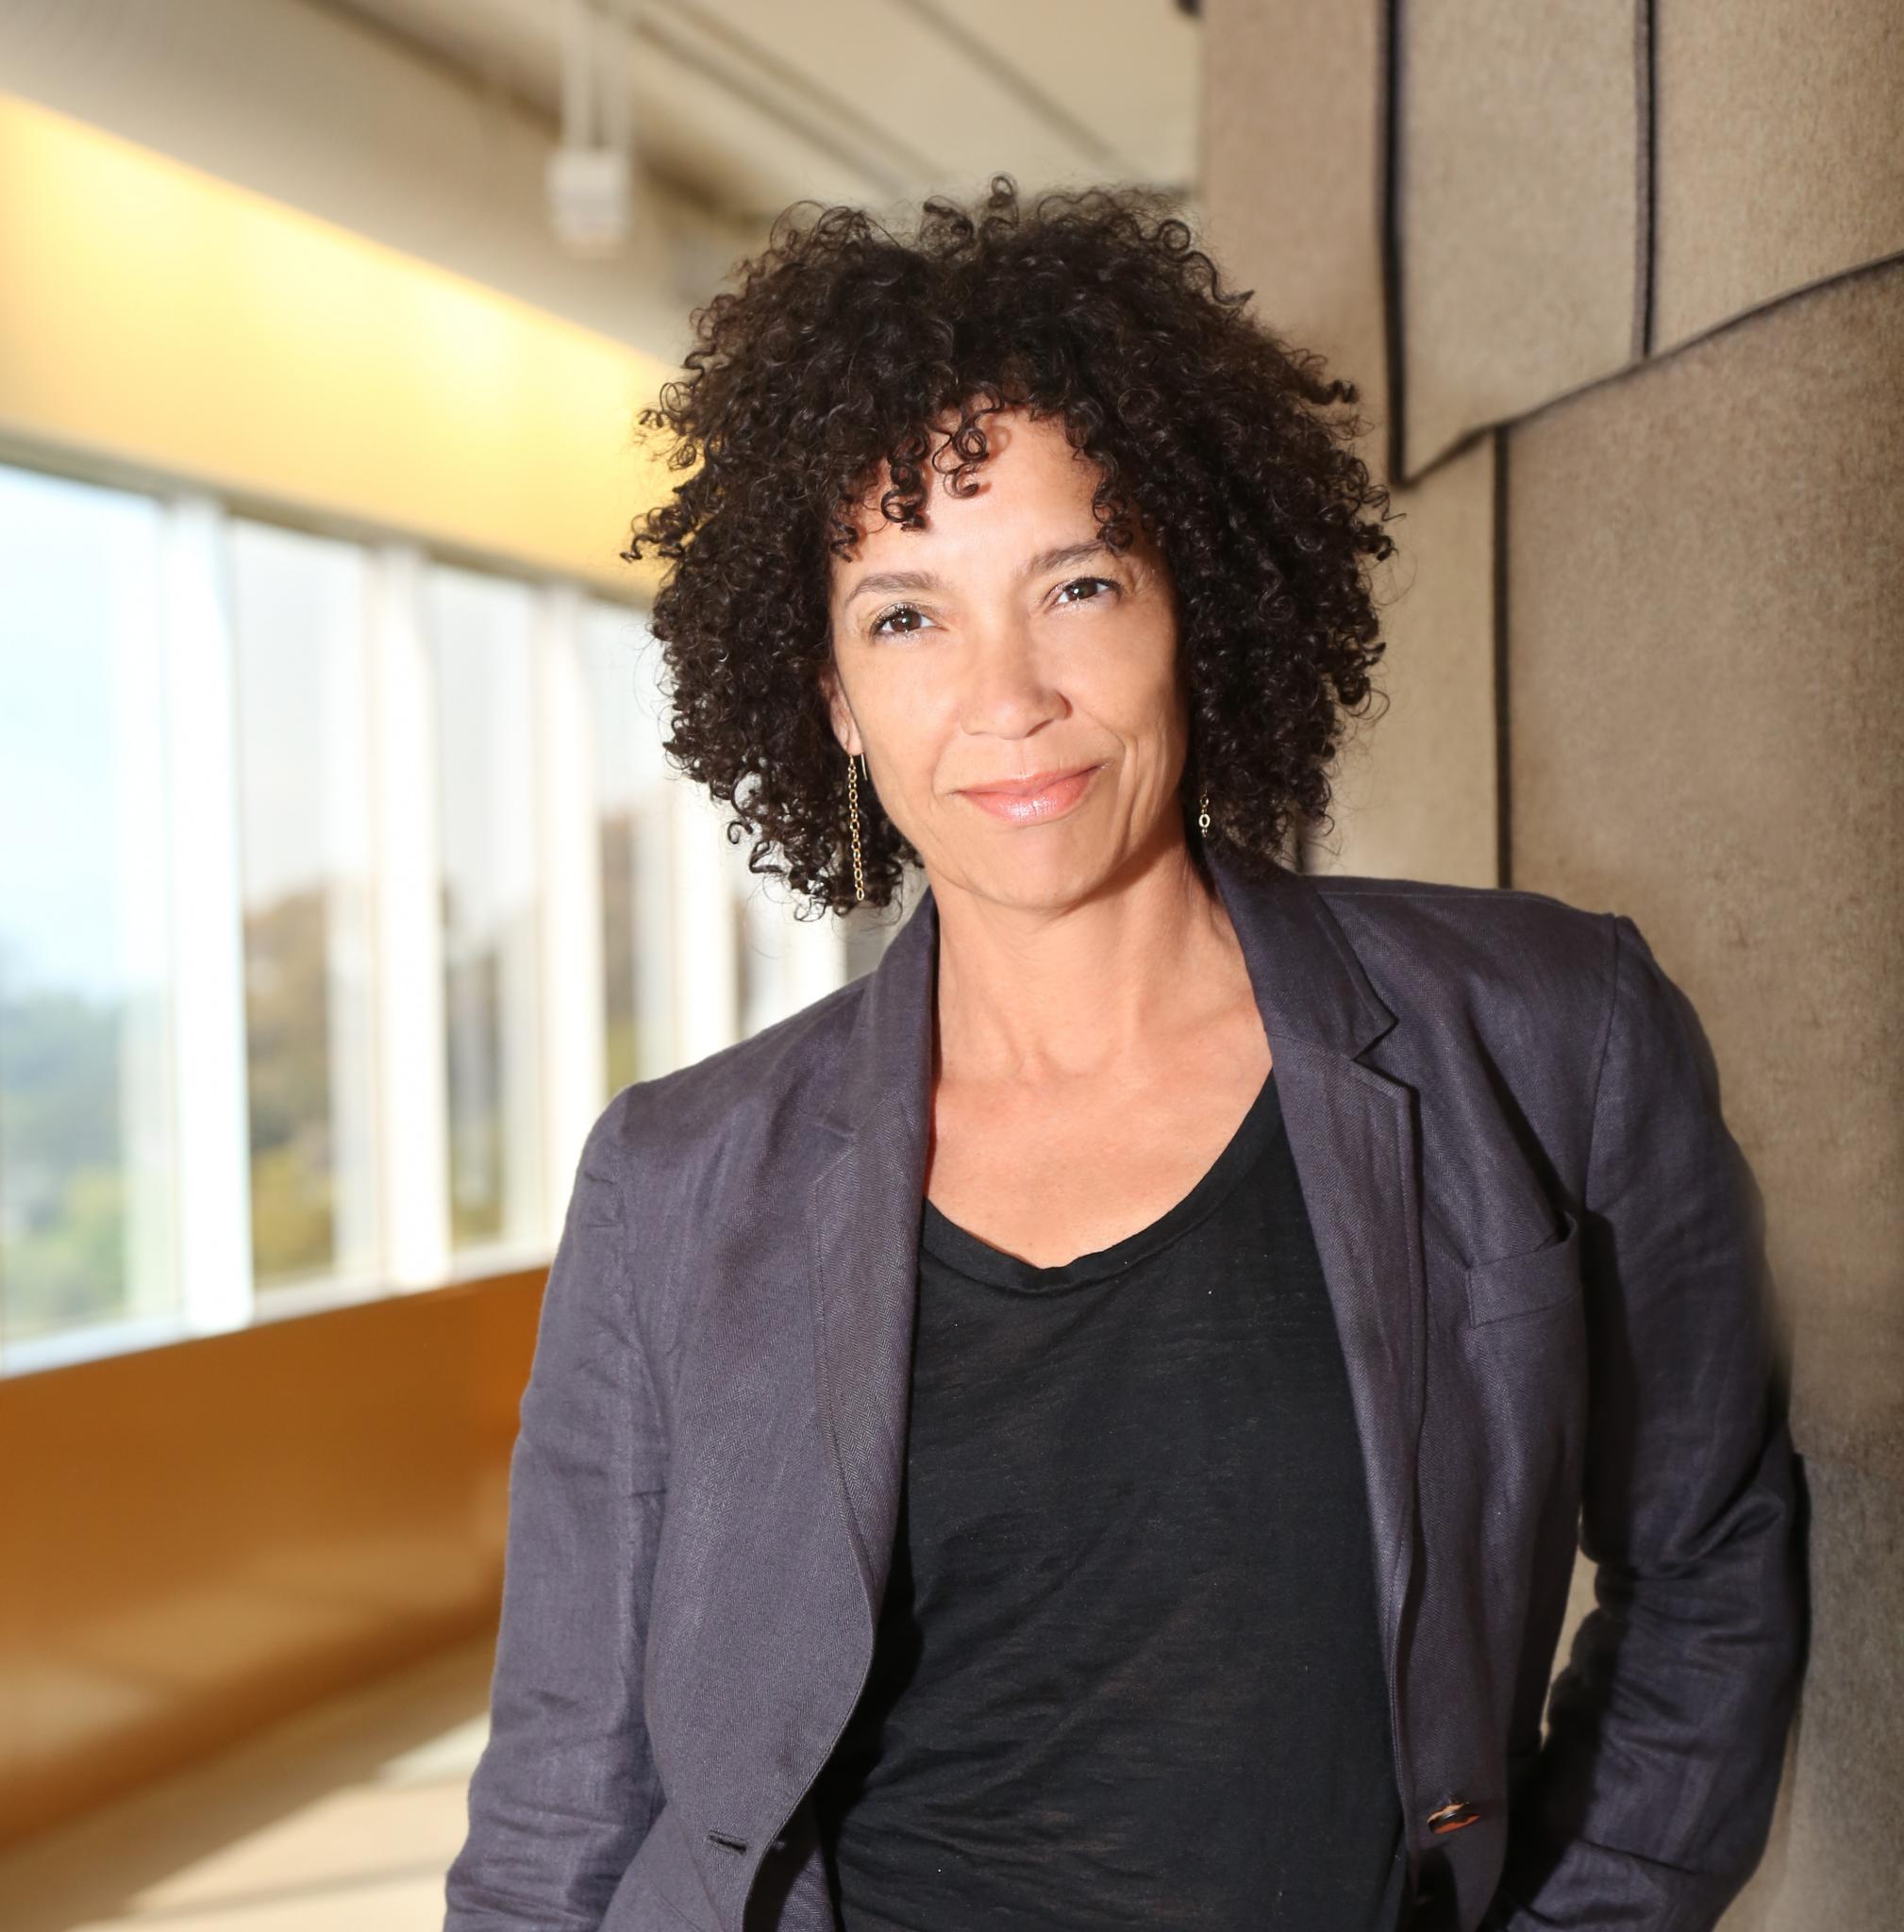 Producer Stephanie Allain Talks Diversity in Hollywood, What to Expect at LA Film Fest 2014
